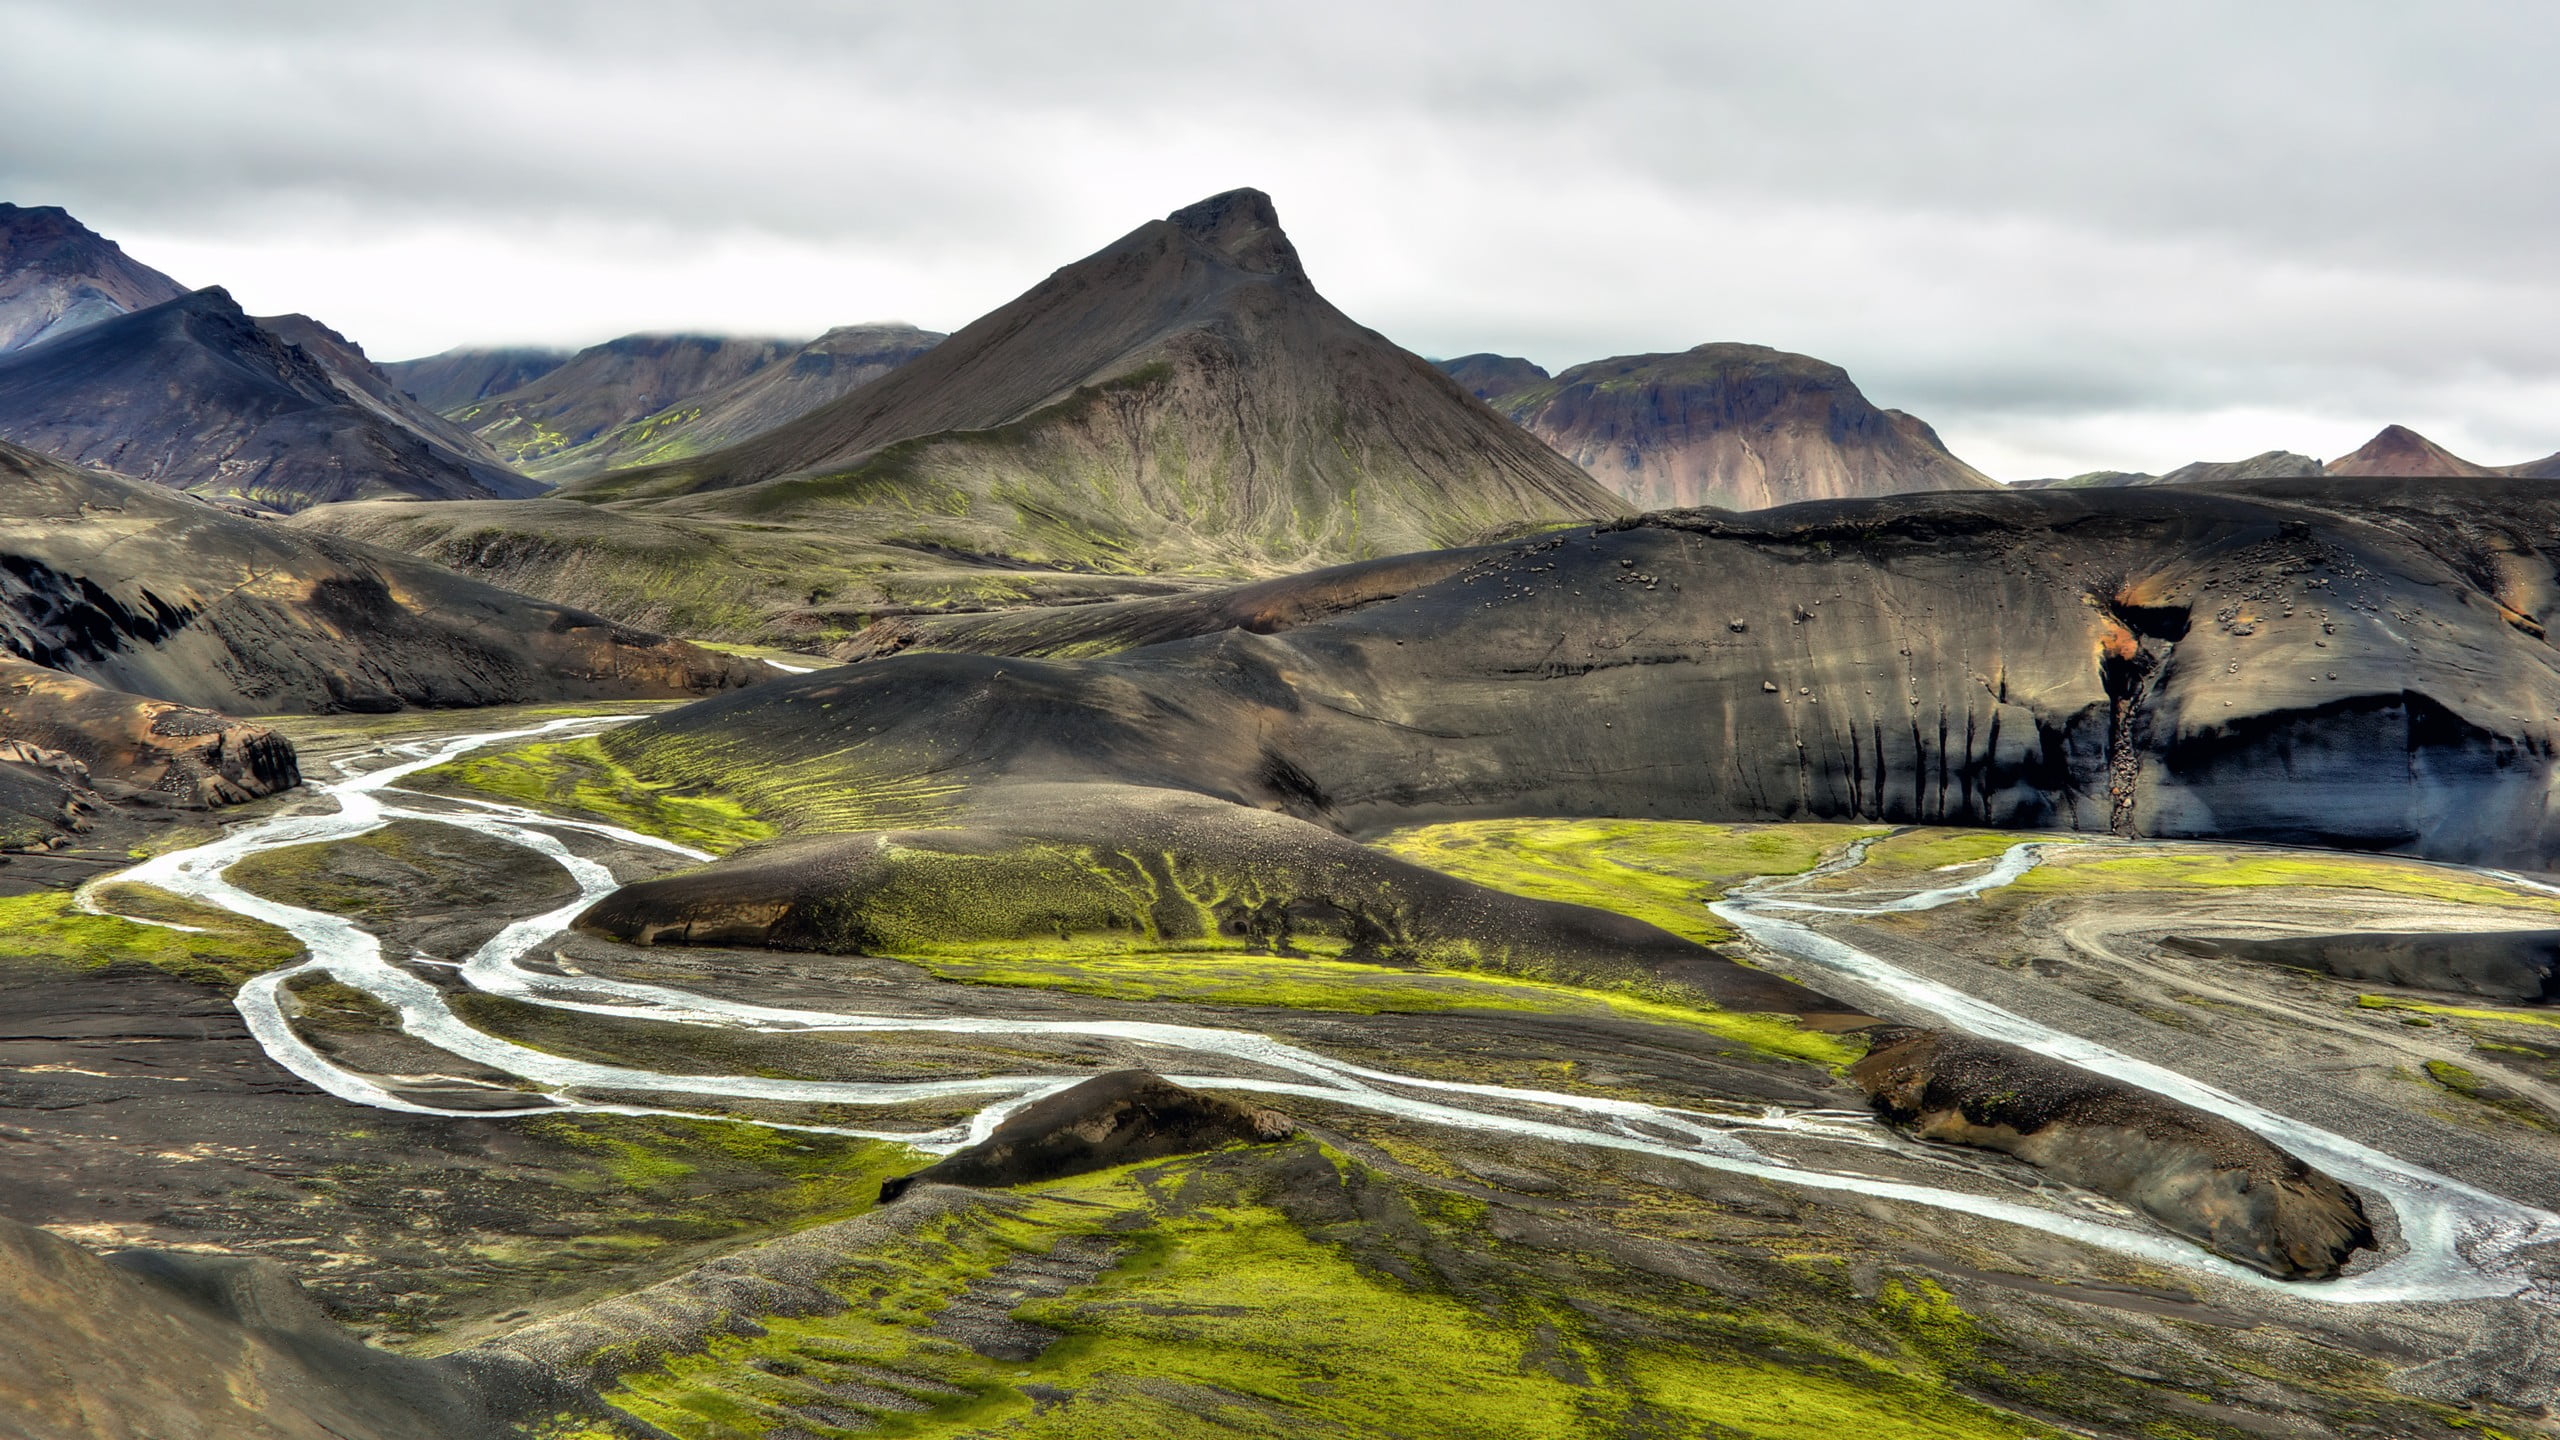 gray river near gray mountain, nature, landscape, mountains, Iceland